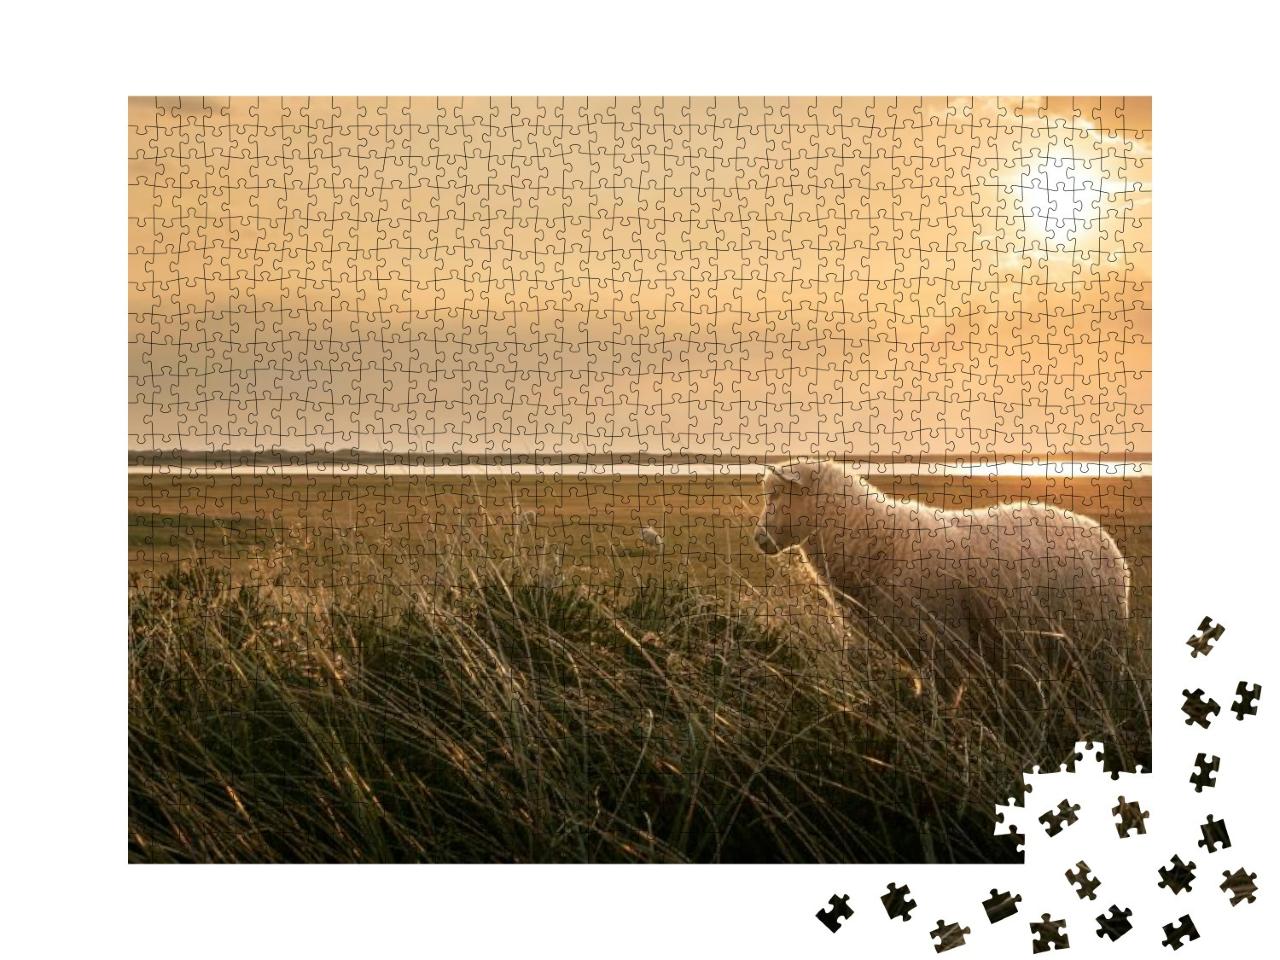 Woolly Lamb in Marram Grass At Sunrise, on the Coastline... Jigsaw Puzzle with 1000 pieces